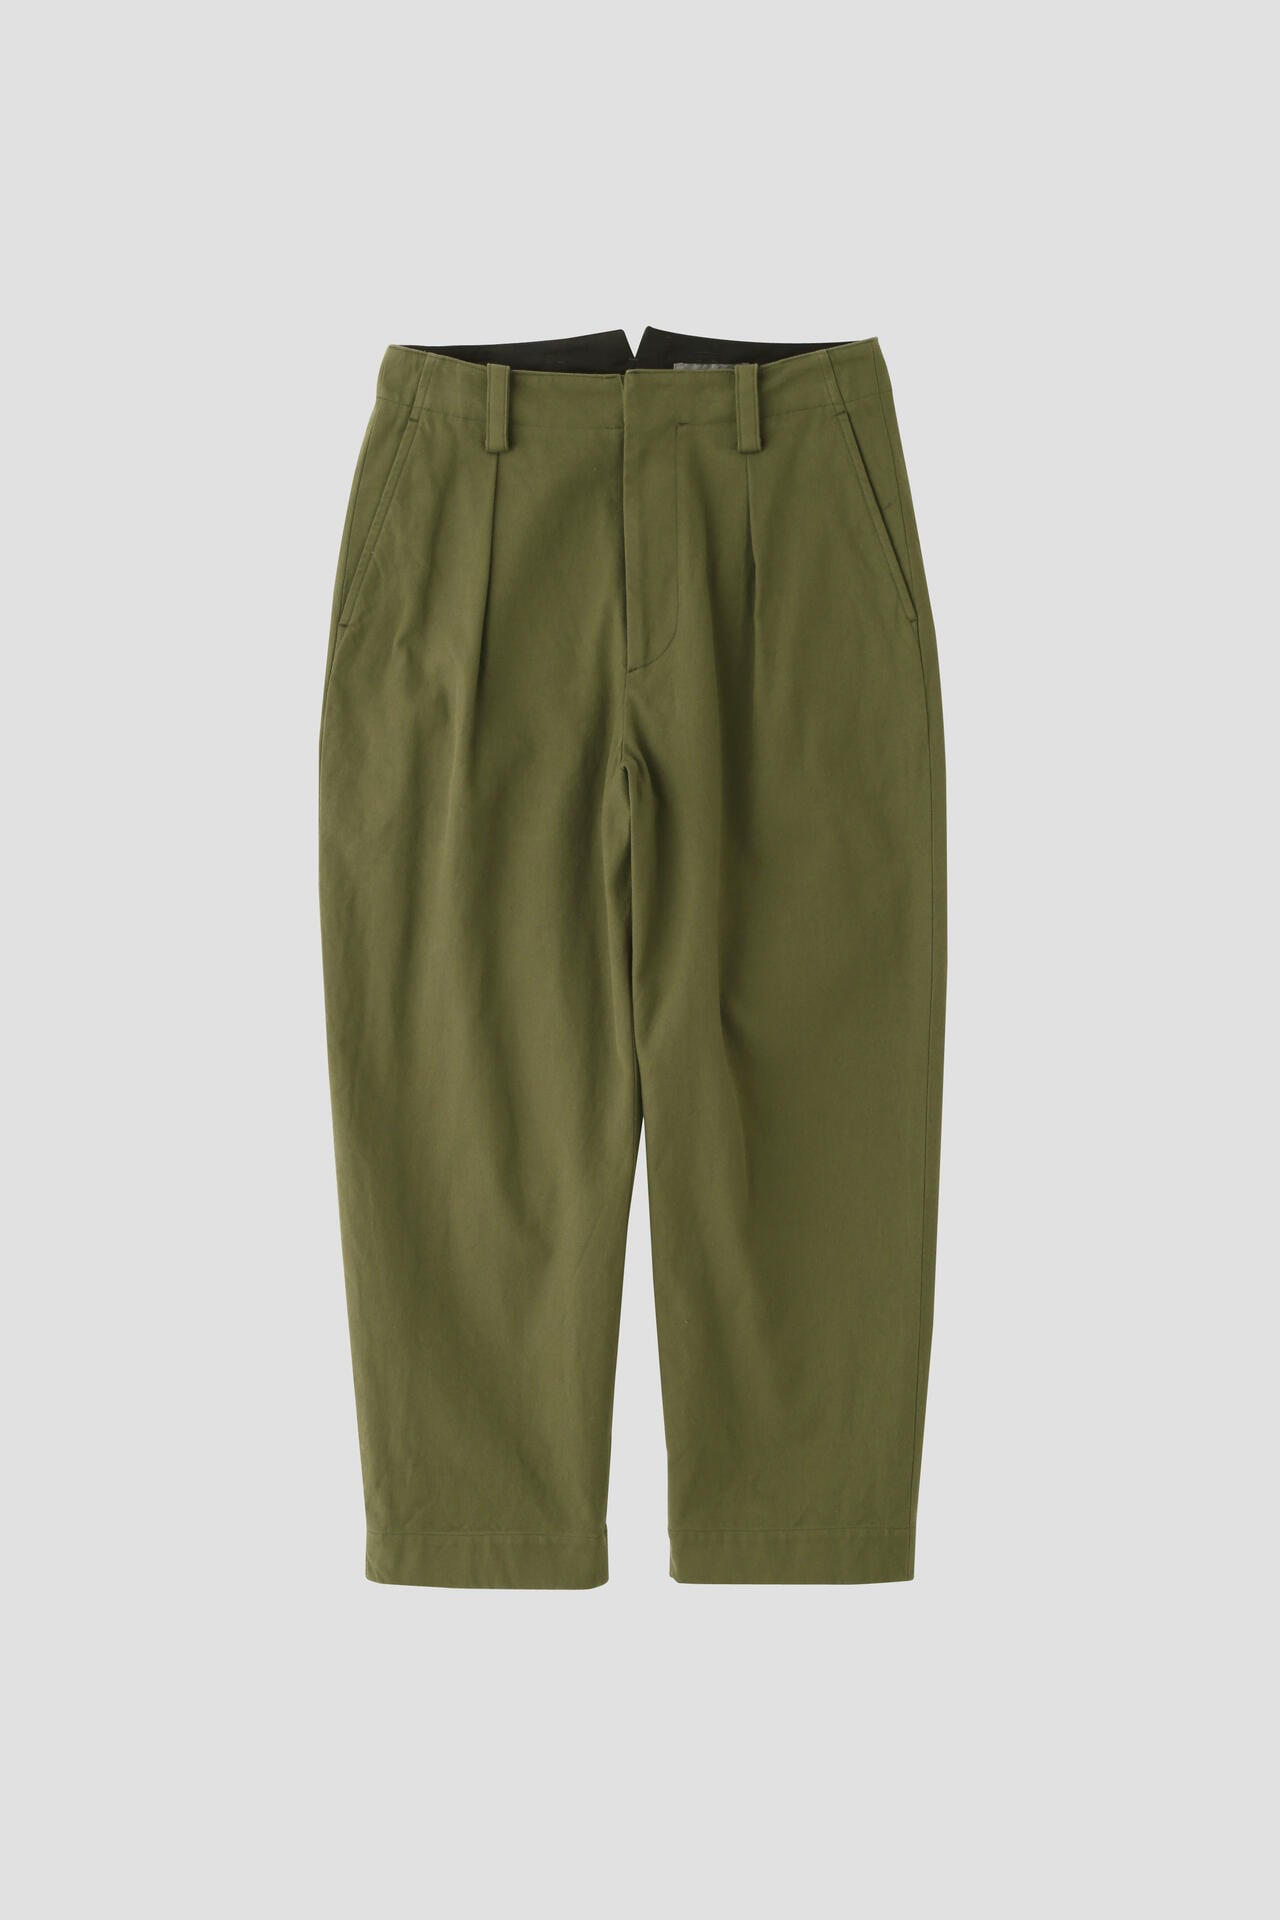 WASHED COTTON TWILL11